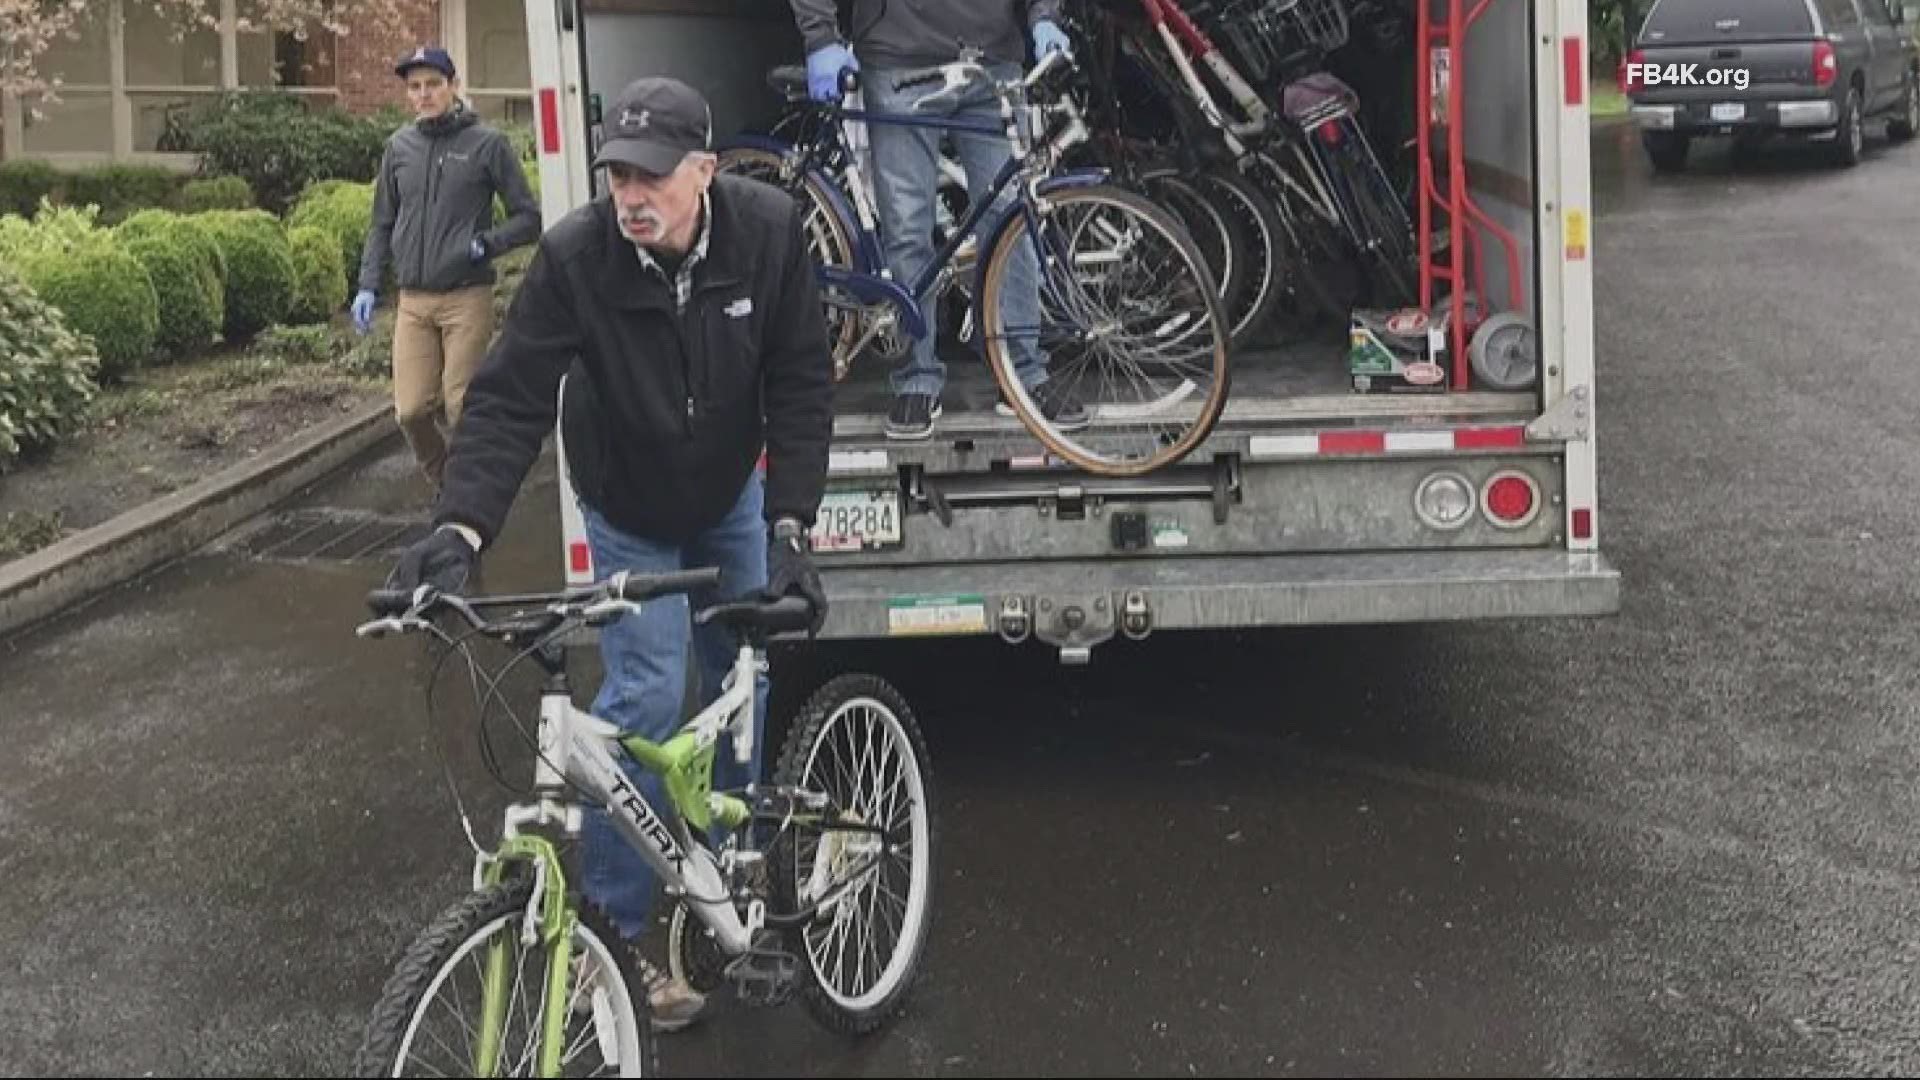 If you have a bike laying around that you’re not using anymore, you can donate it to a great cause this weekend. Ashley Korslien tells us how.